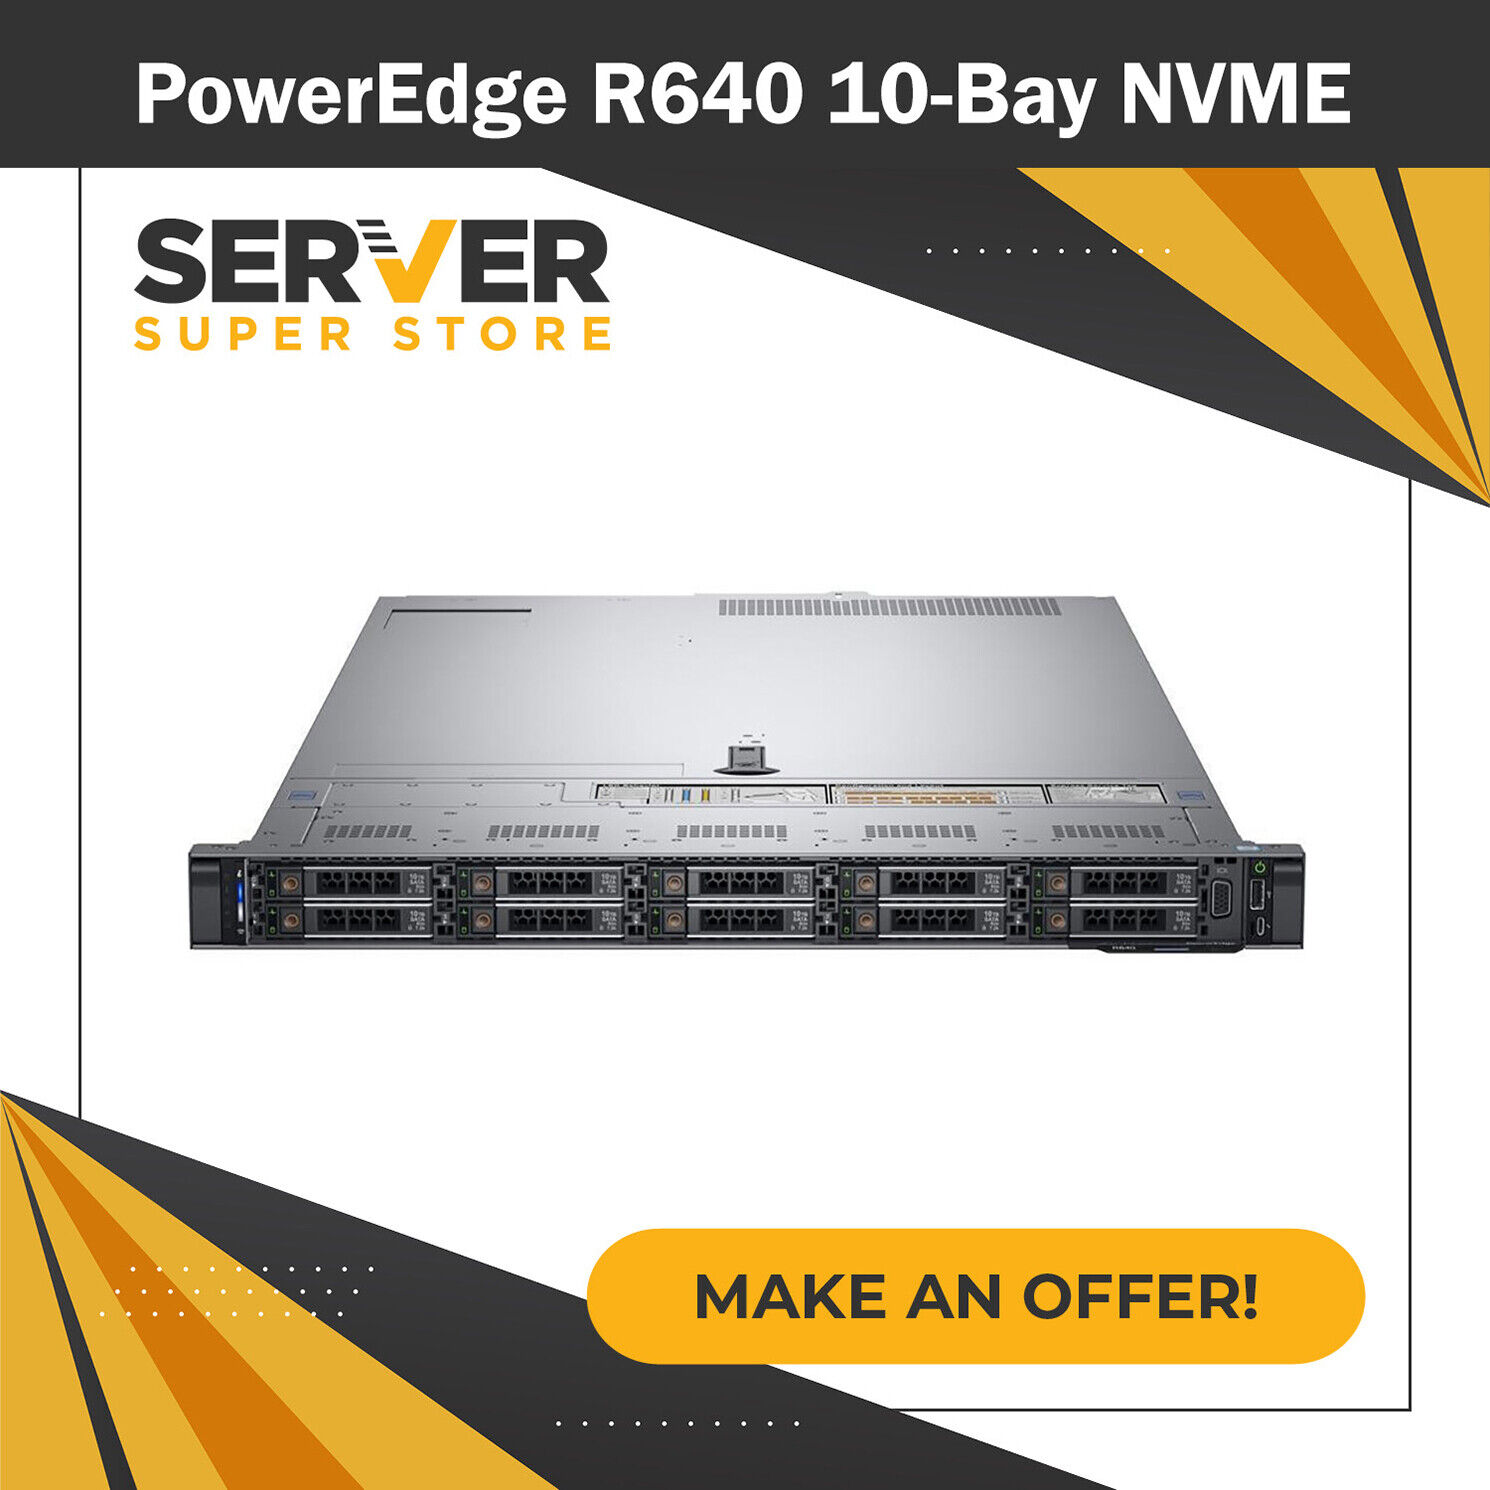 Dell PowerEdge R640 NVMe Server 2x Gold 6130 = 32 Cores H730P 128GB RAM 8x trays